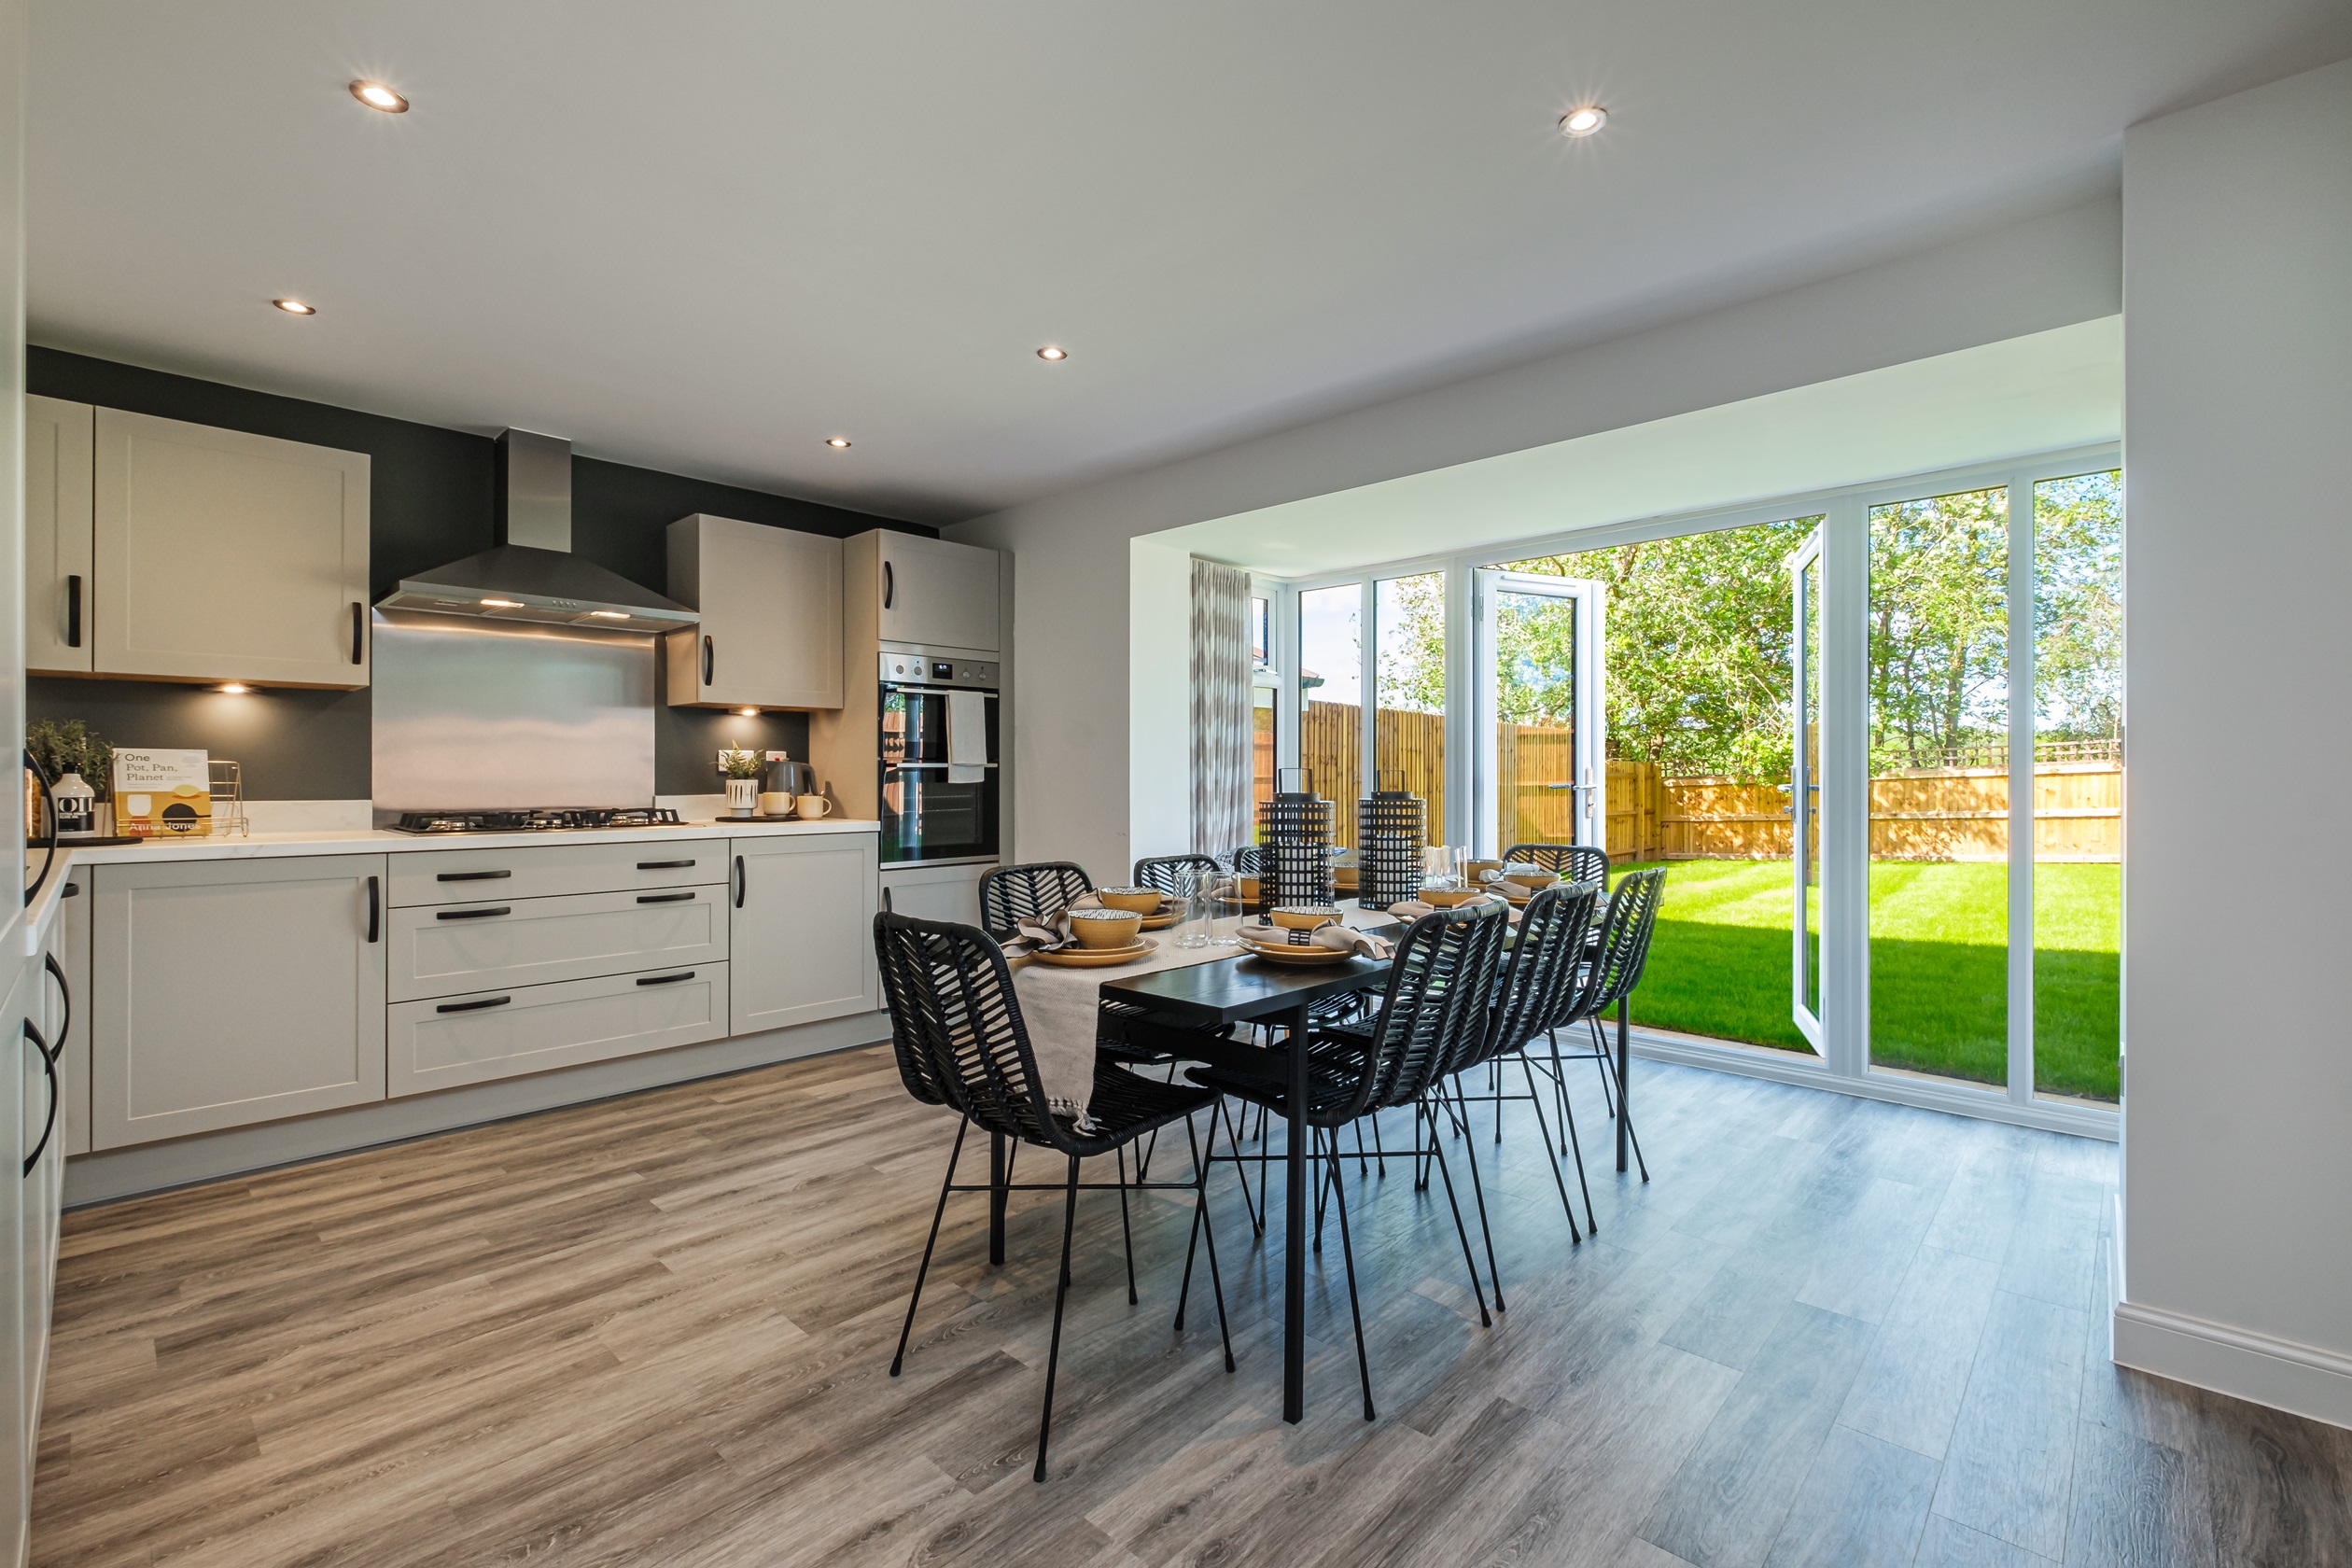 Property 1 of 10. Kitchen Diner With French Doors In An Exeter Home